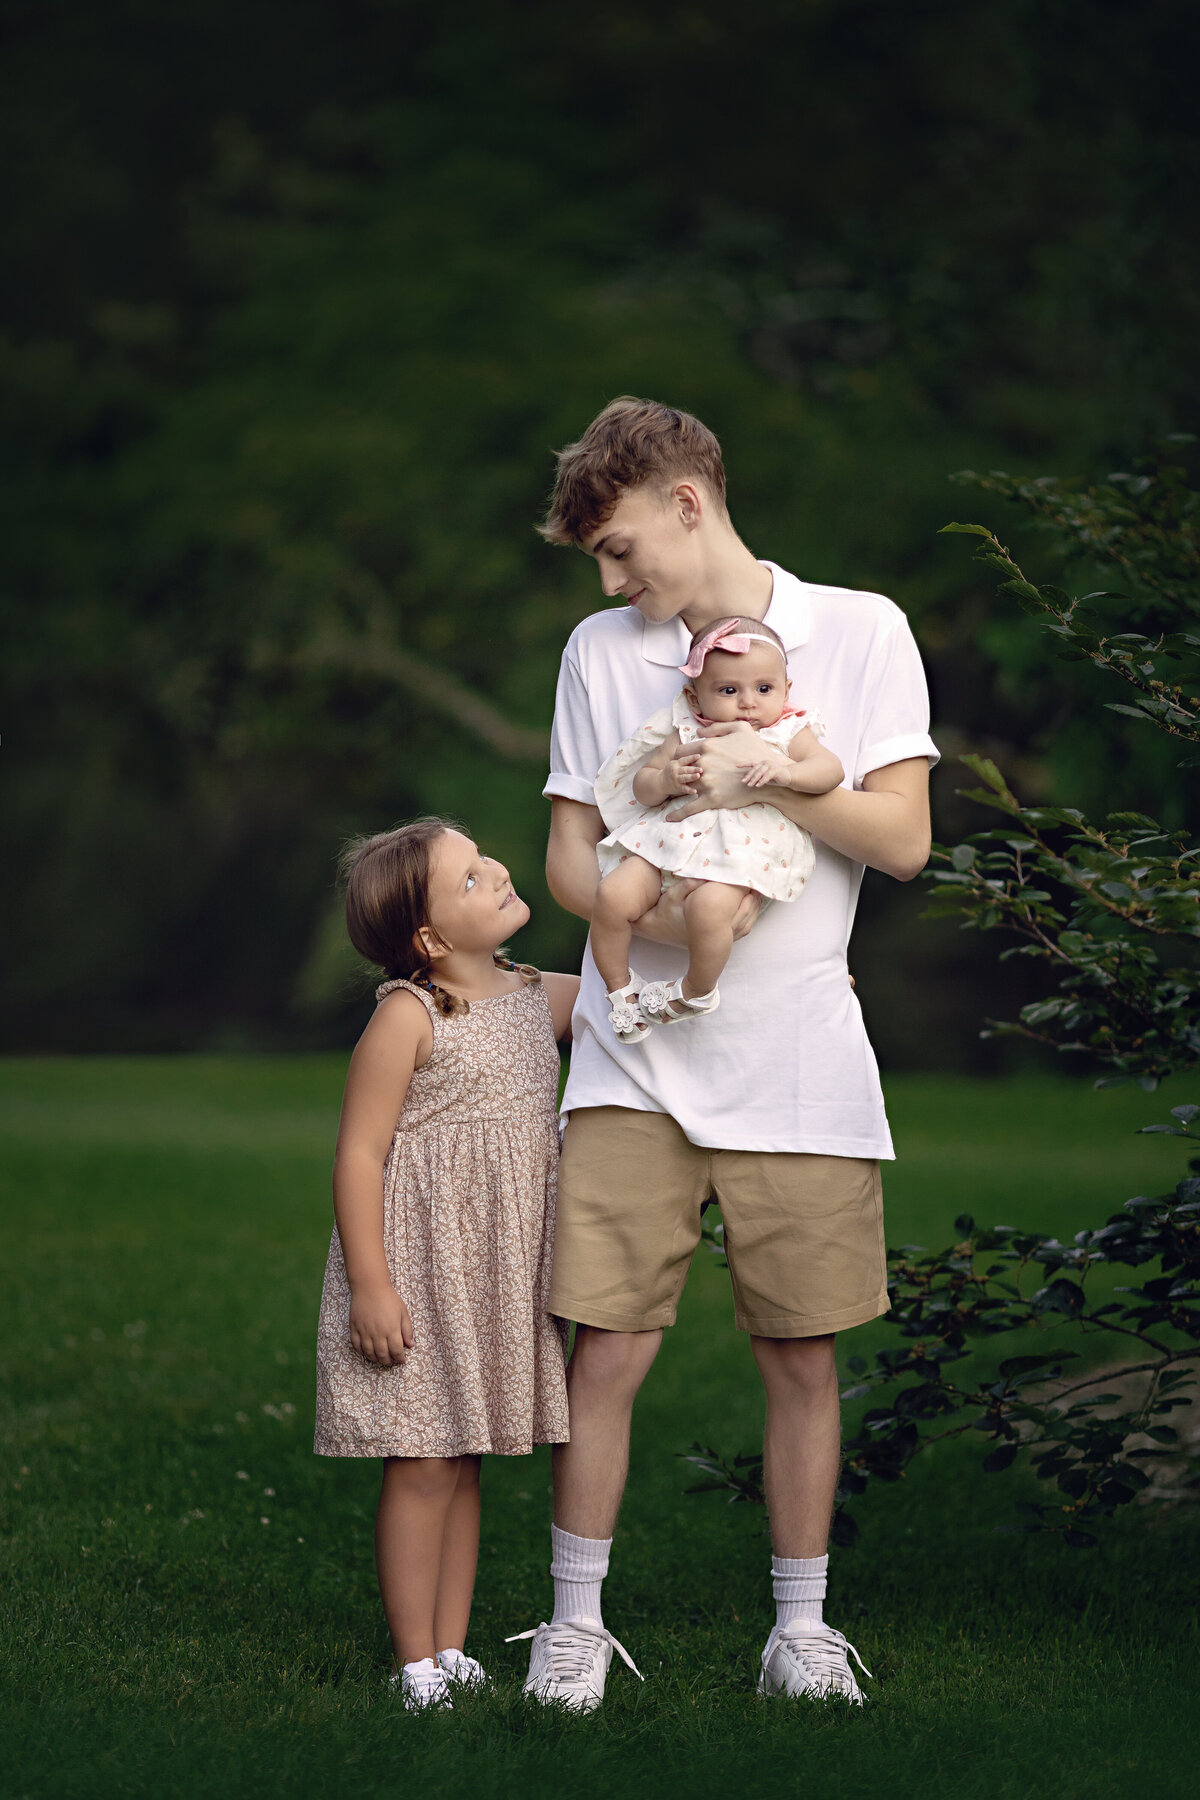 A teen boy in a white shirt stands in a park holding his infant baby sister while his toddler sister hugs onto him